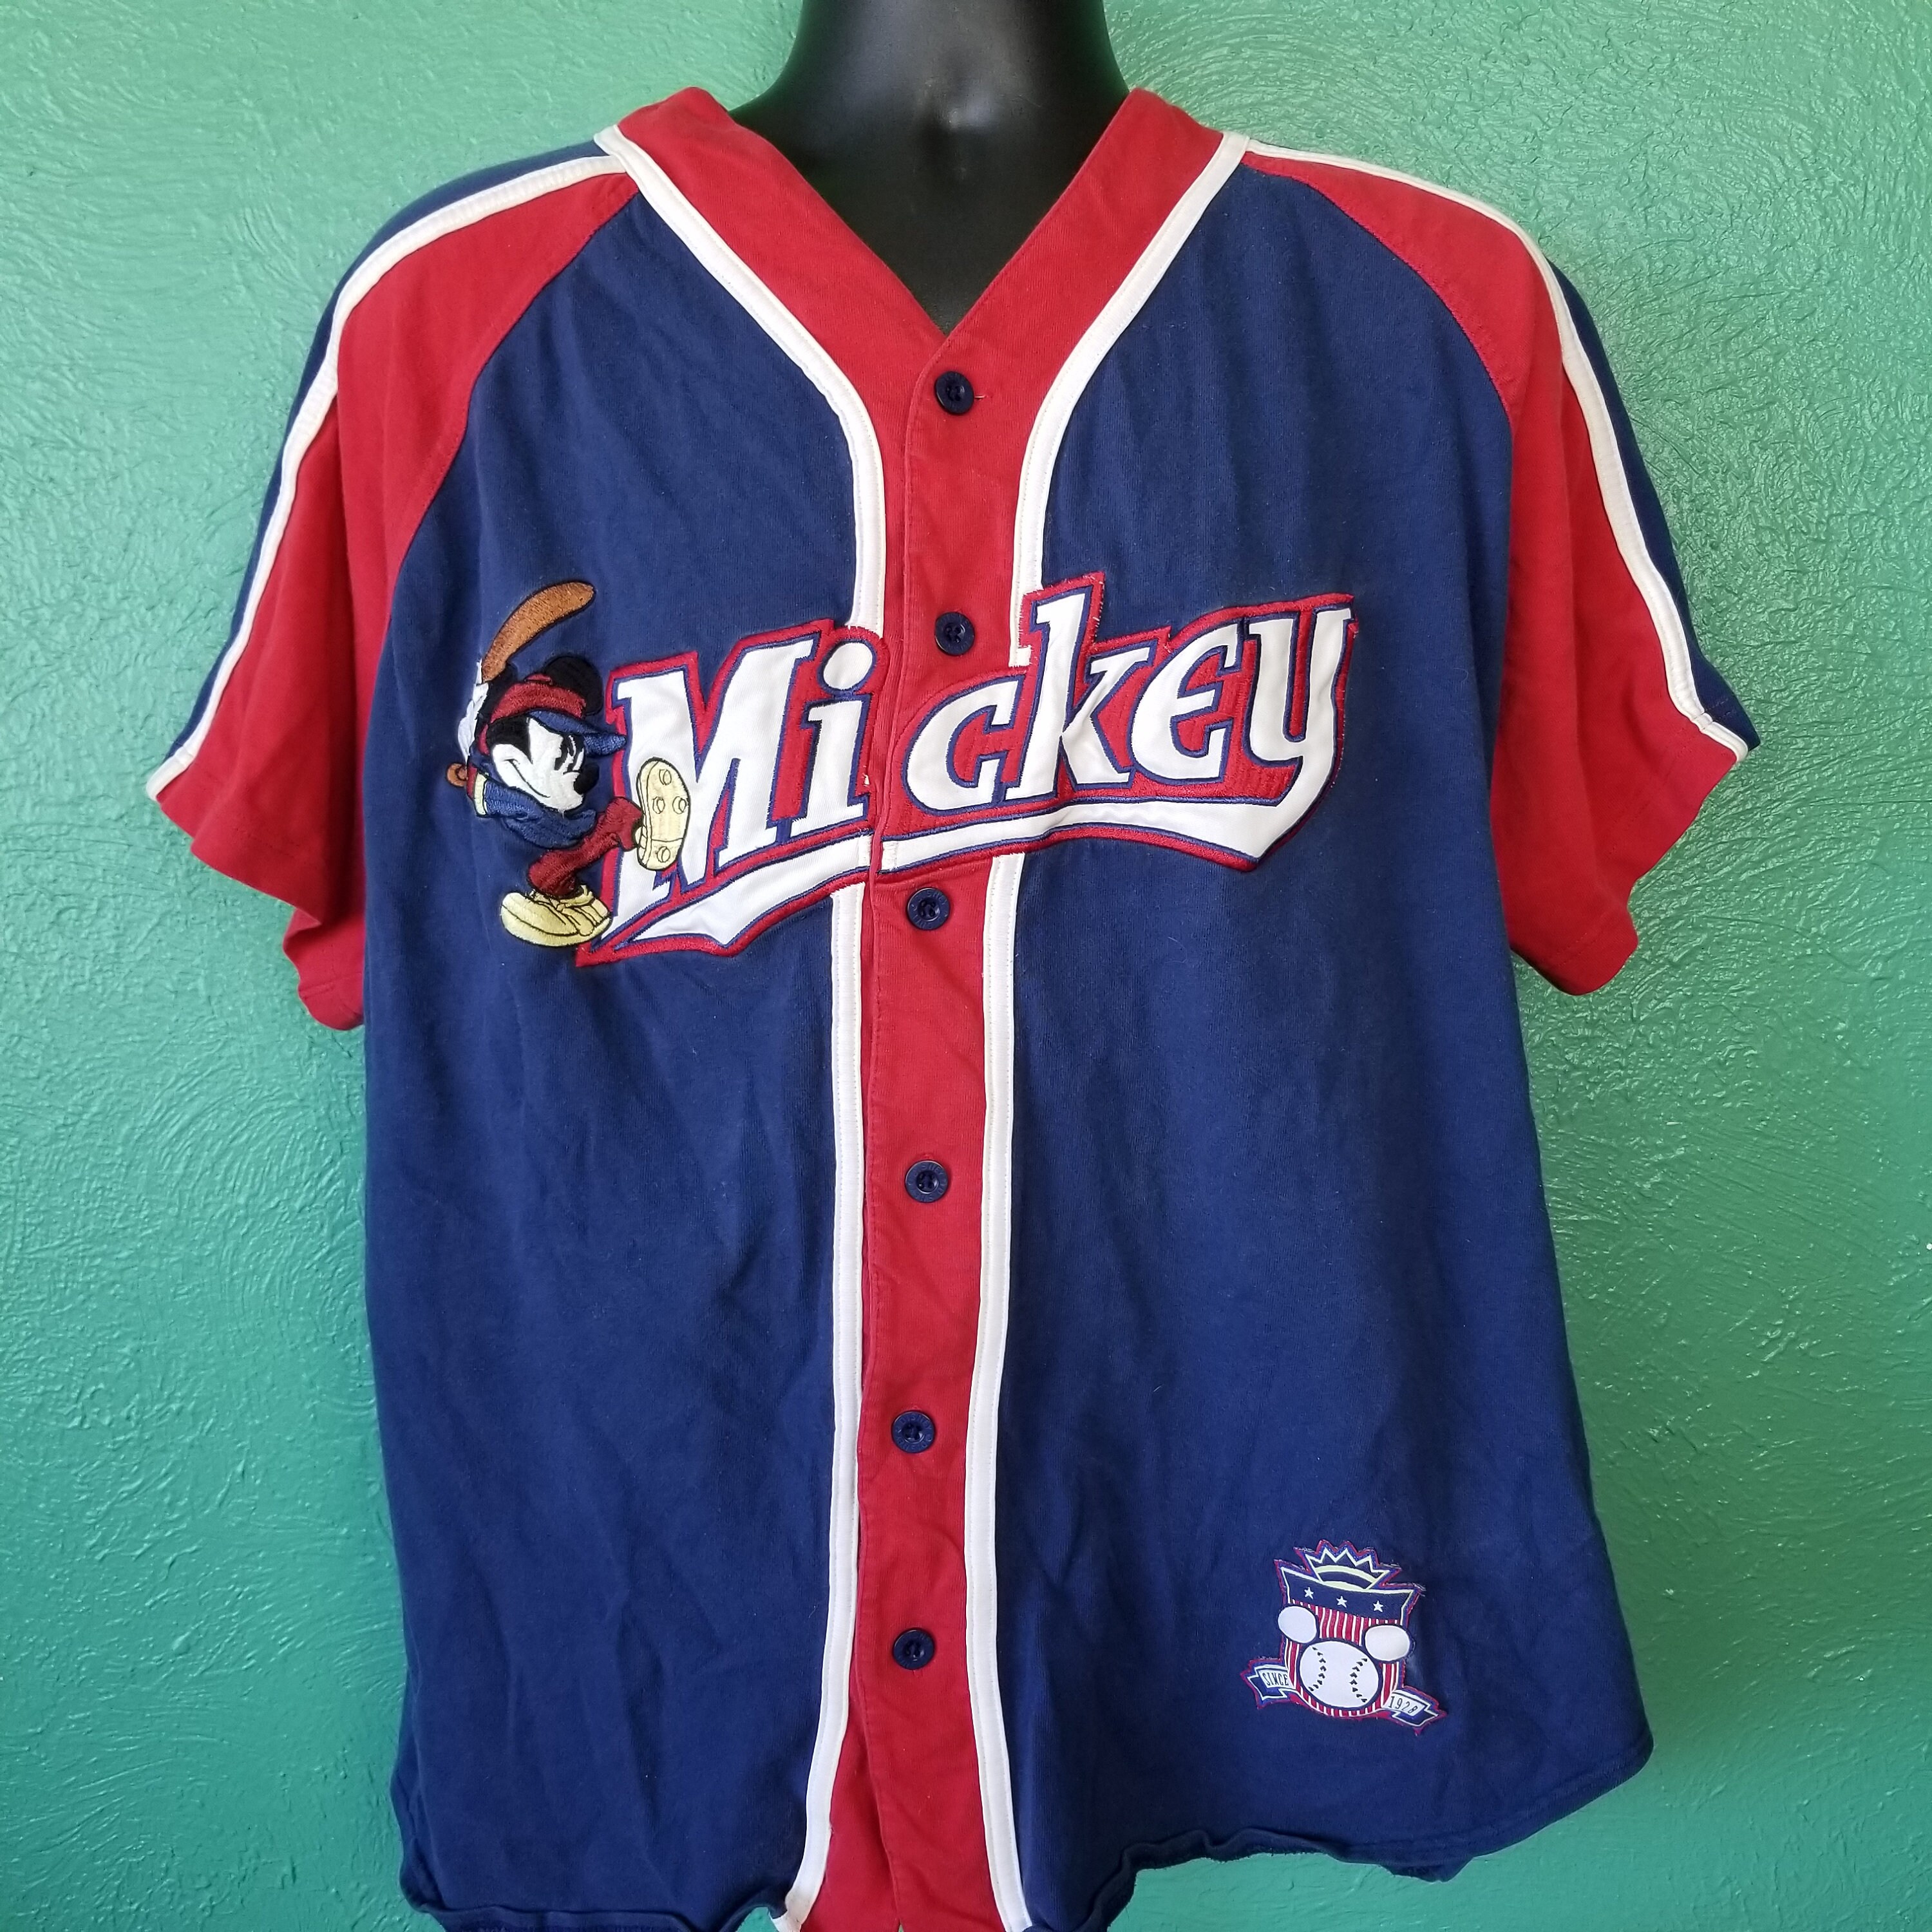 Cartoon Baseball Jersey Gift for Disneyland Trip Baseball Player Personalized Custom Name And Number Mickey Mouse Disney Baseball Jersey